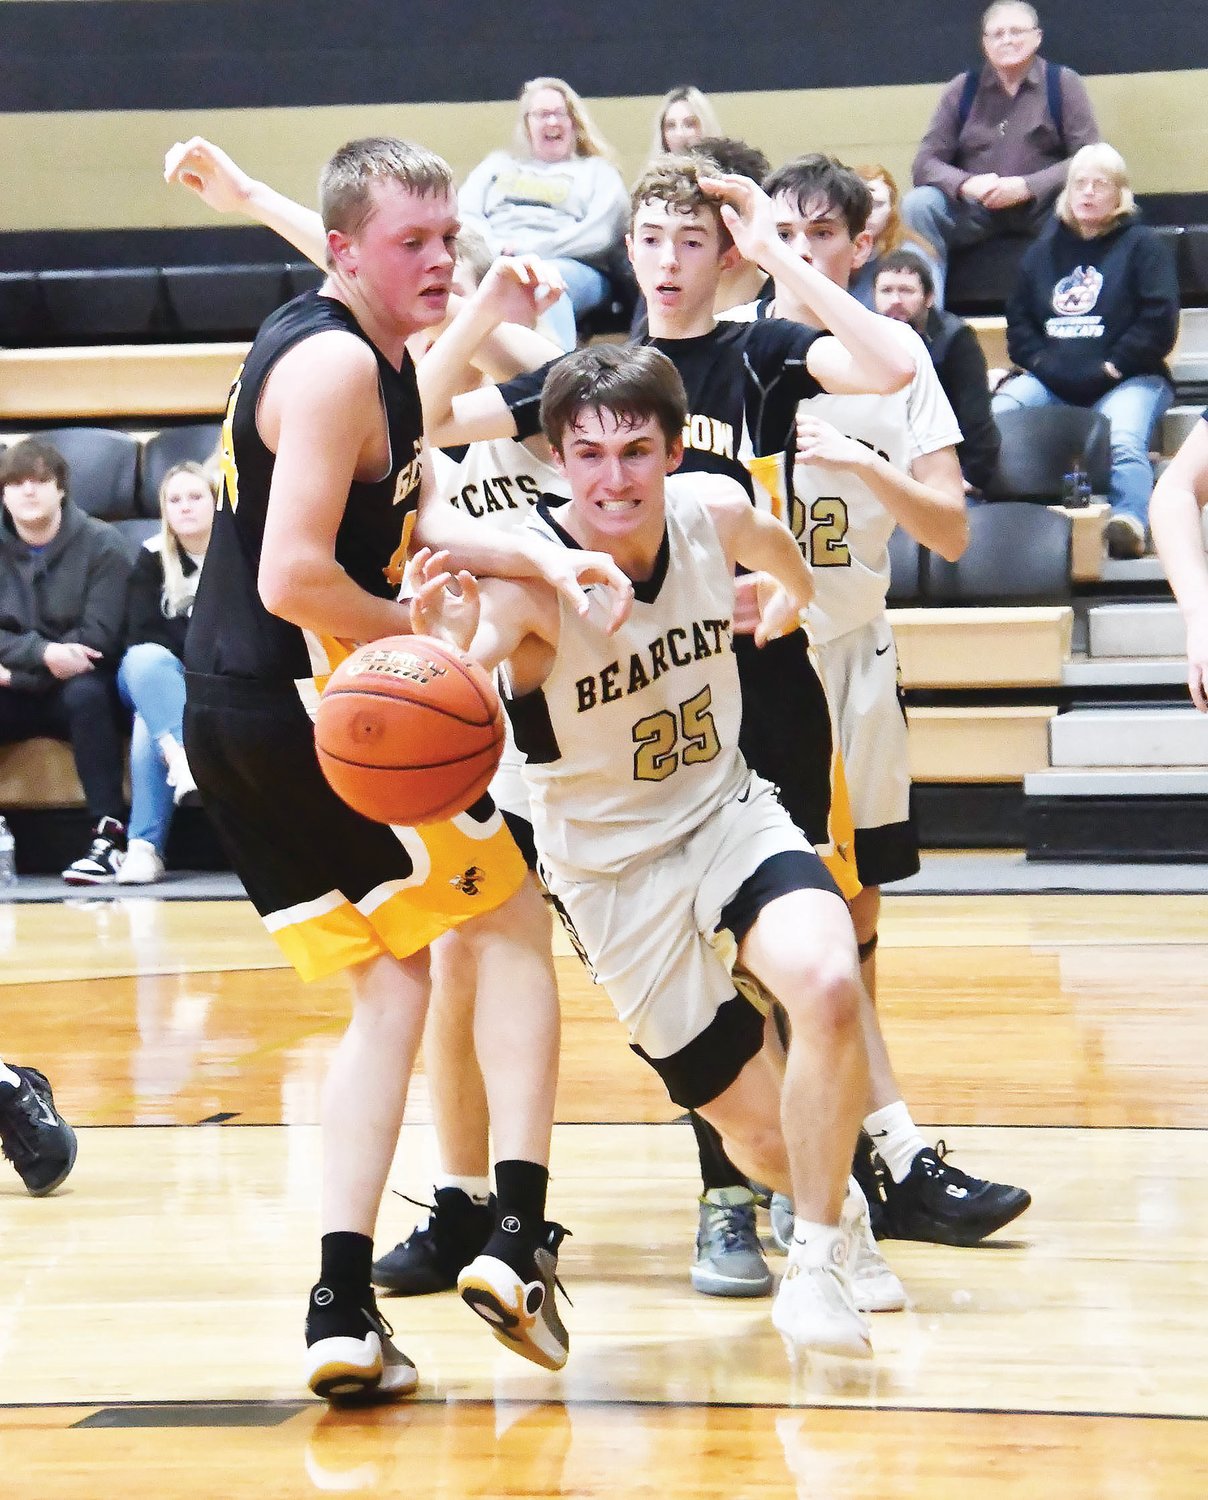 Cairo senior Logan Head (25) chases after the ball while pursued by Glasgow's Preston Thies during a Central Activities Conference boys basketball in Cairo on Thursday, Jan. 12. The Bearcats won, 57-47.